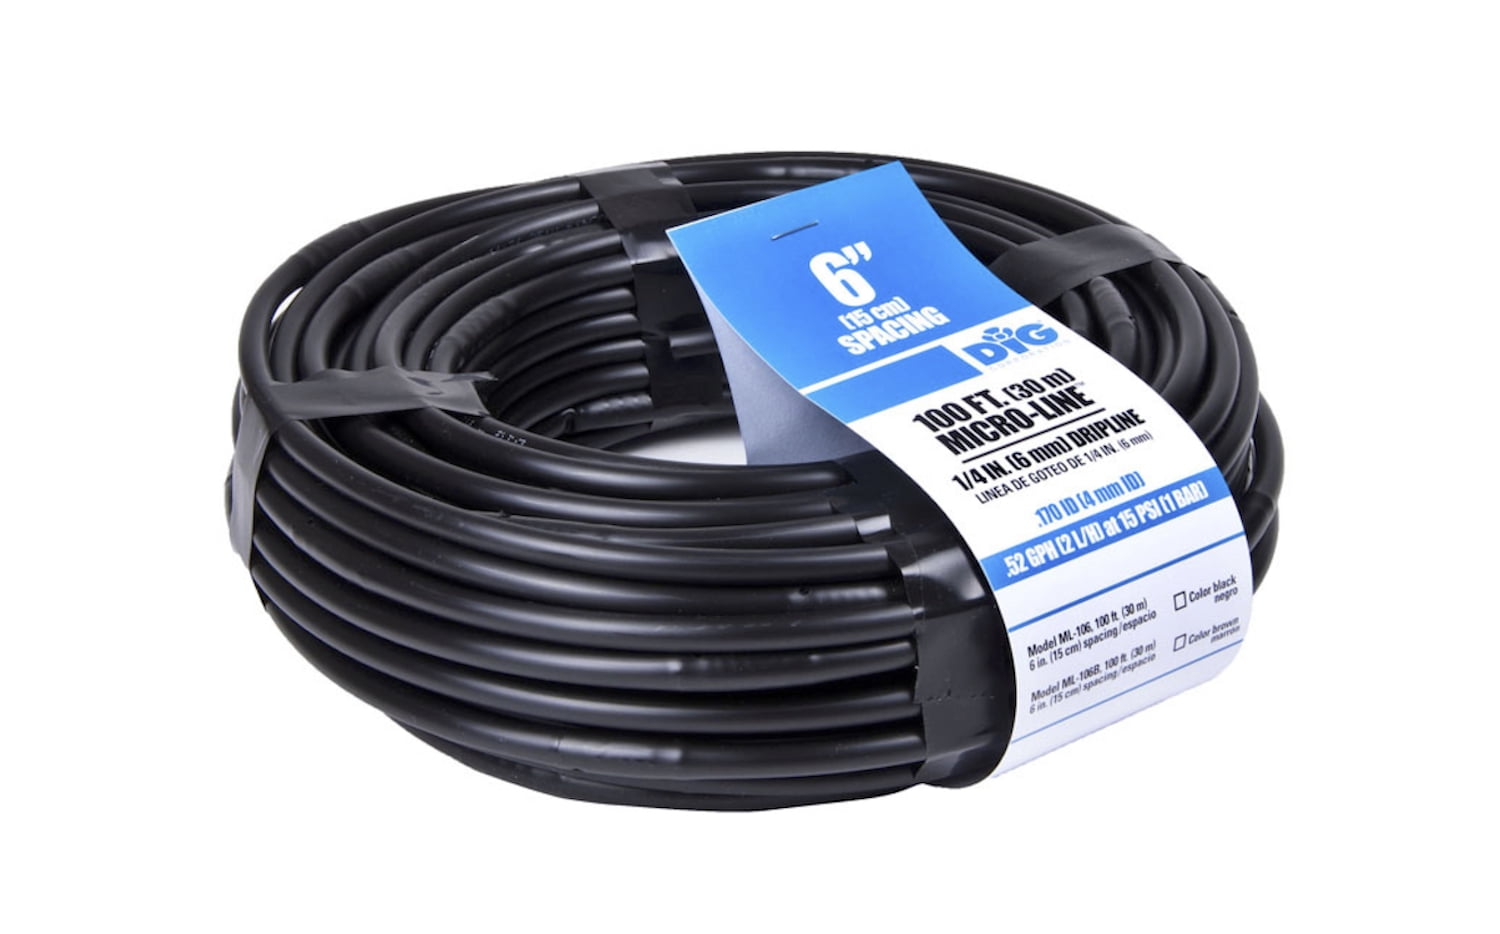 Drip and Micro Irrigation 50 ft DIG Drip-Line Tubing 6 in Emitter Spacing 